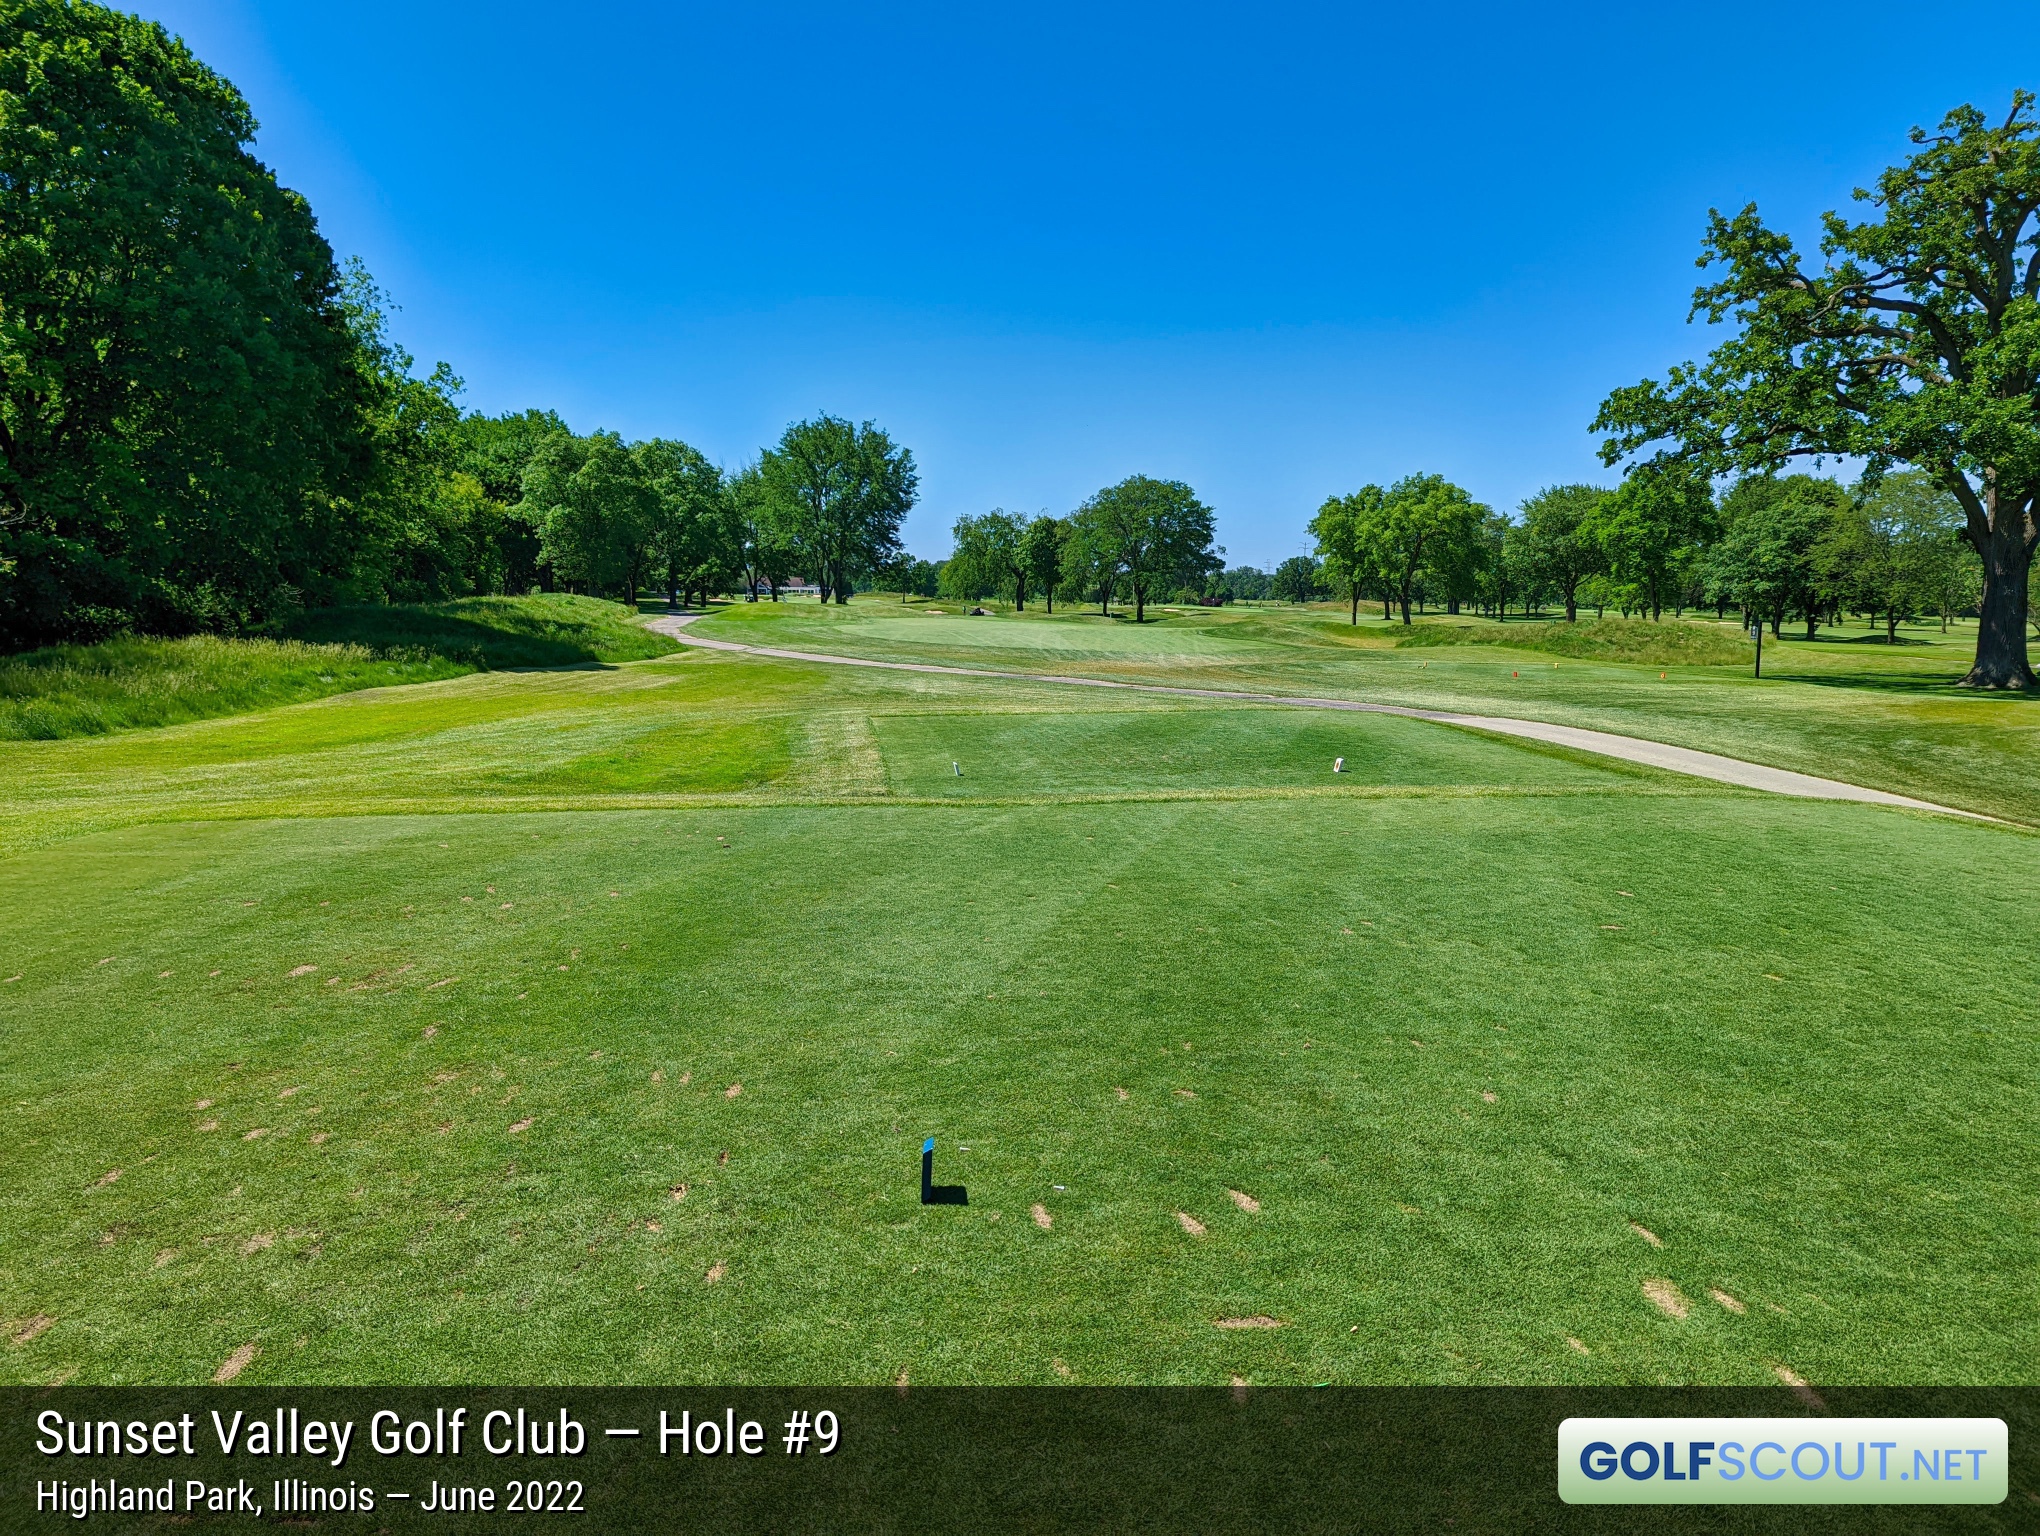 Photo of hole #9 at Sunset Valley Golf Club in Highland Park, Illinois. 